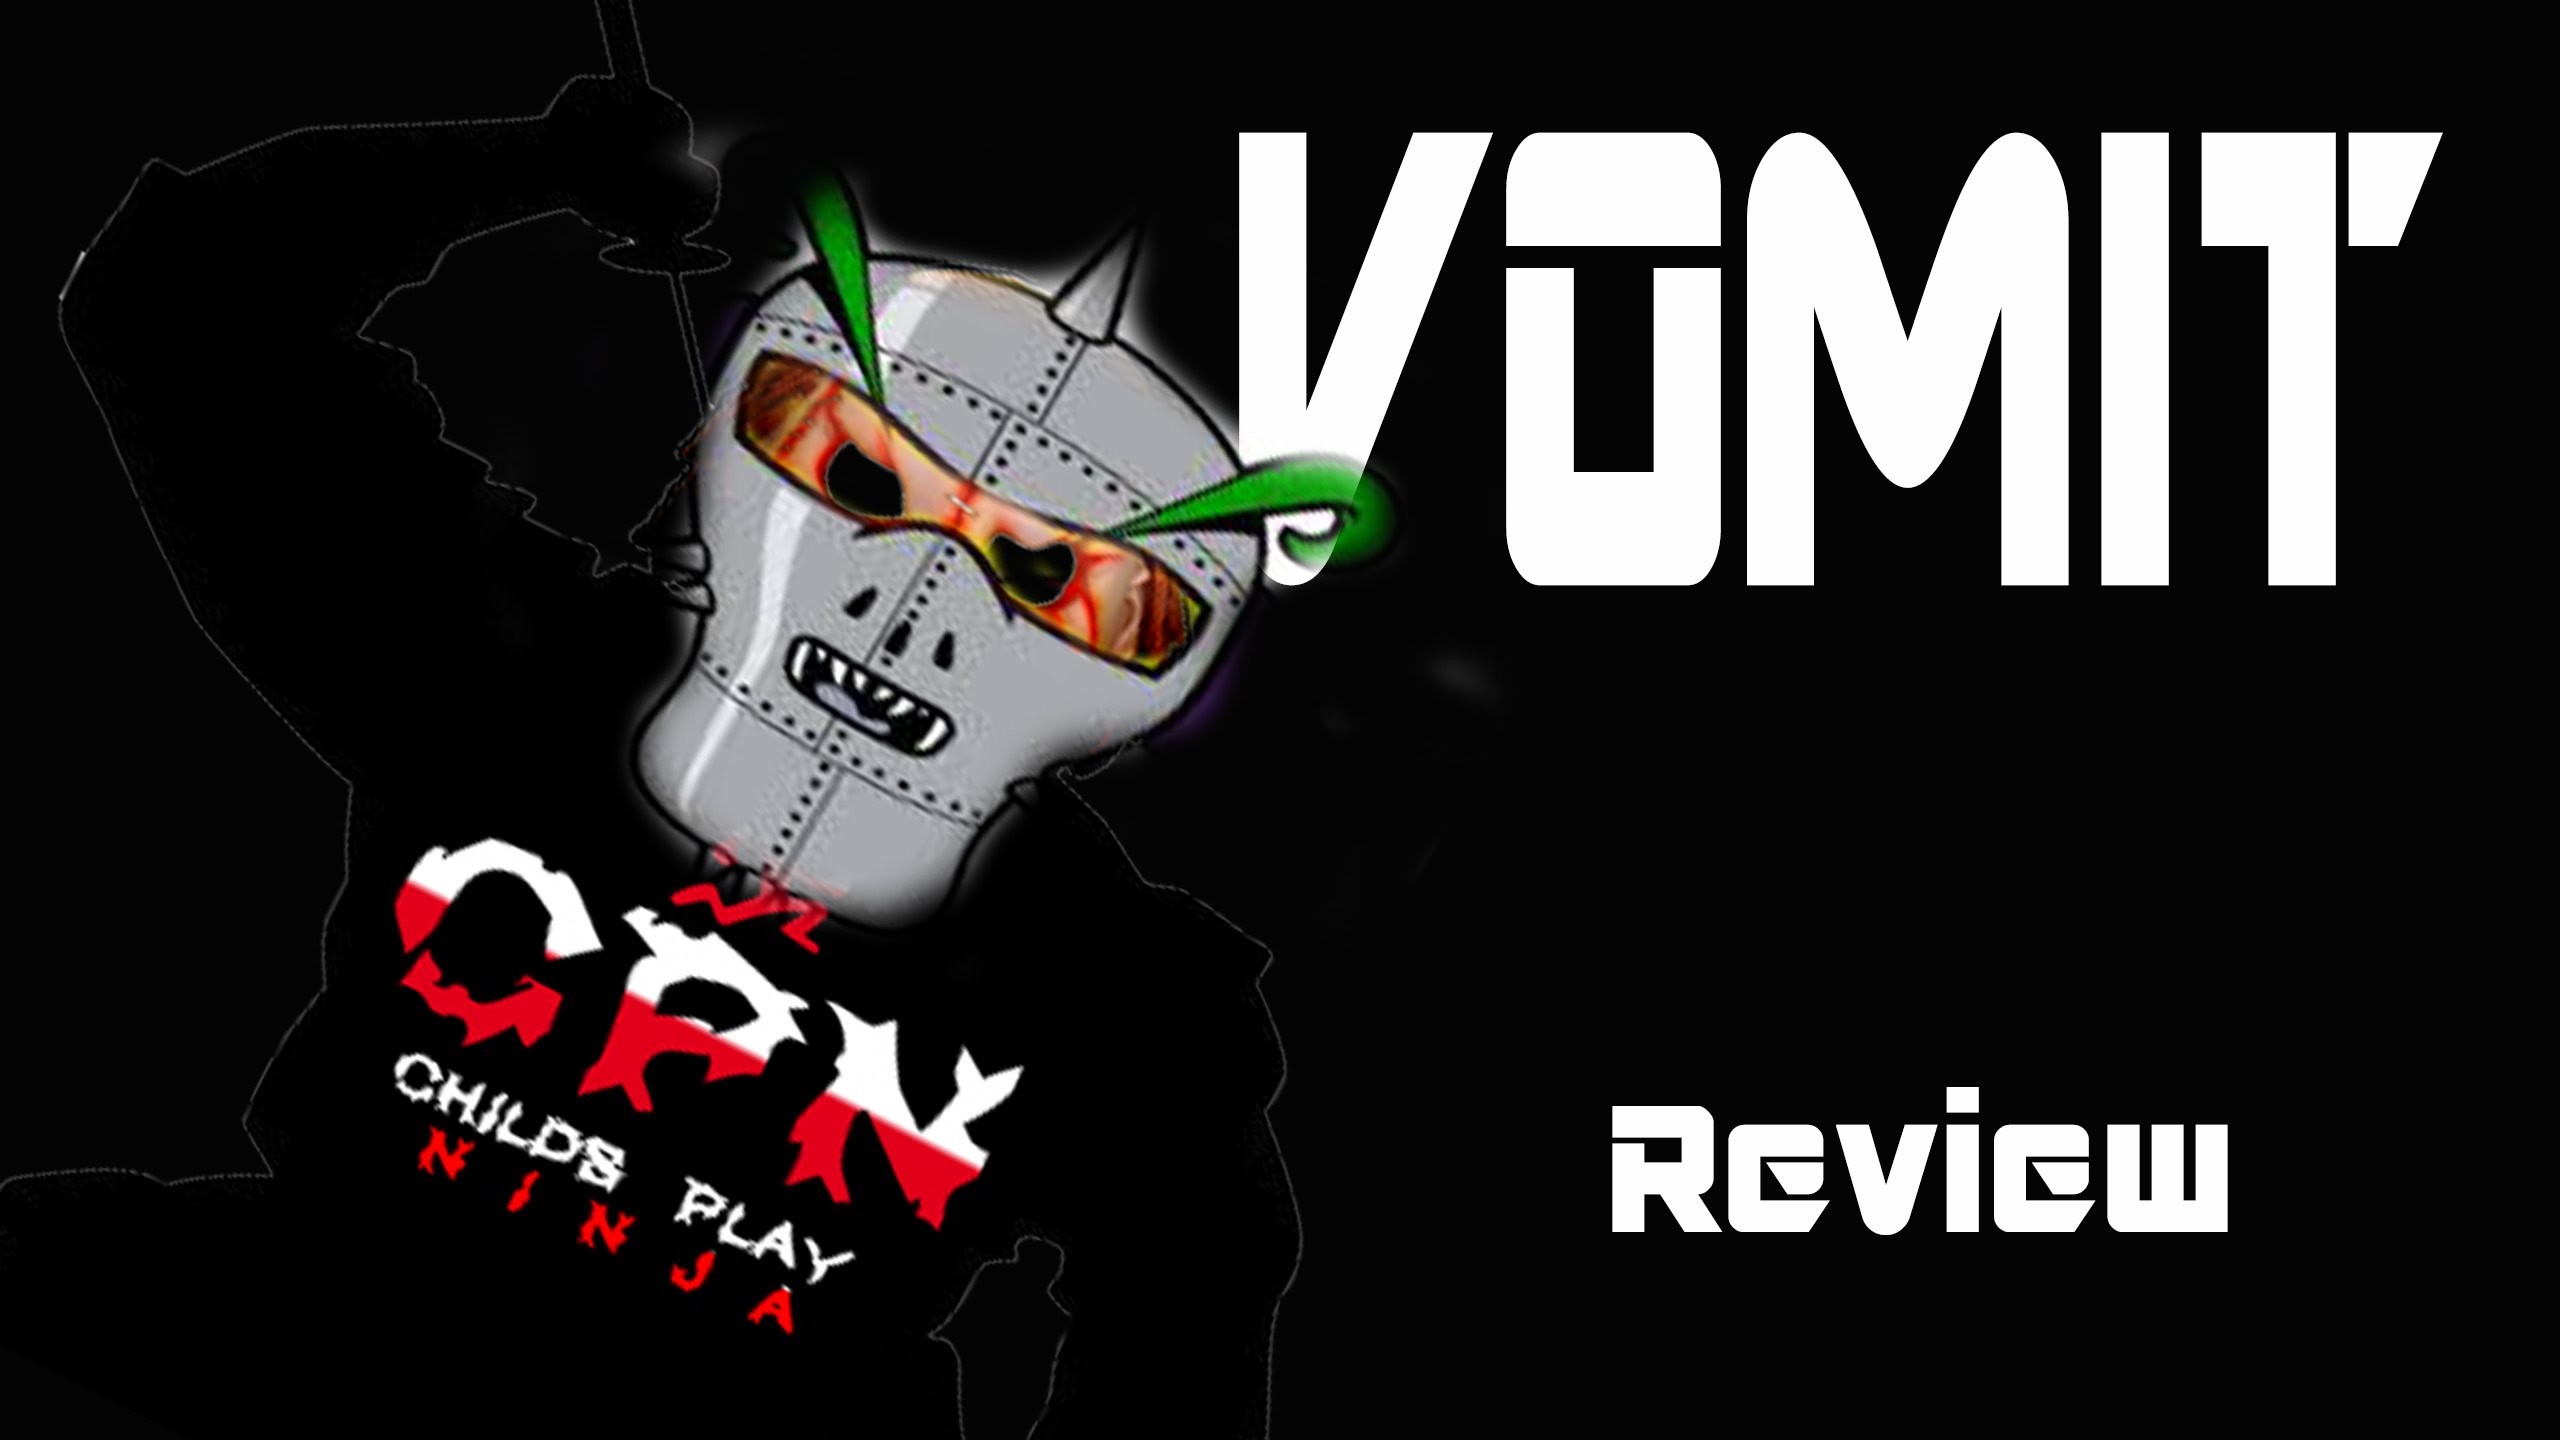 2560x1440 New ICP Track "Vomit" Review